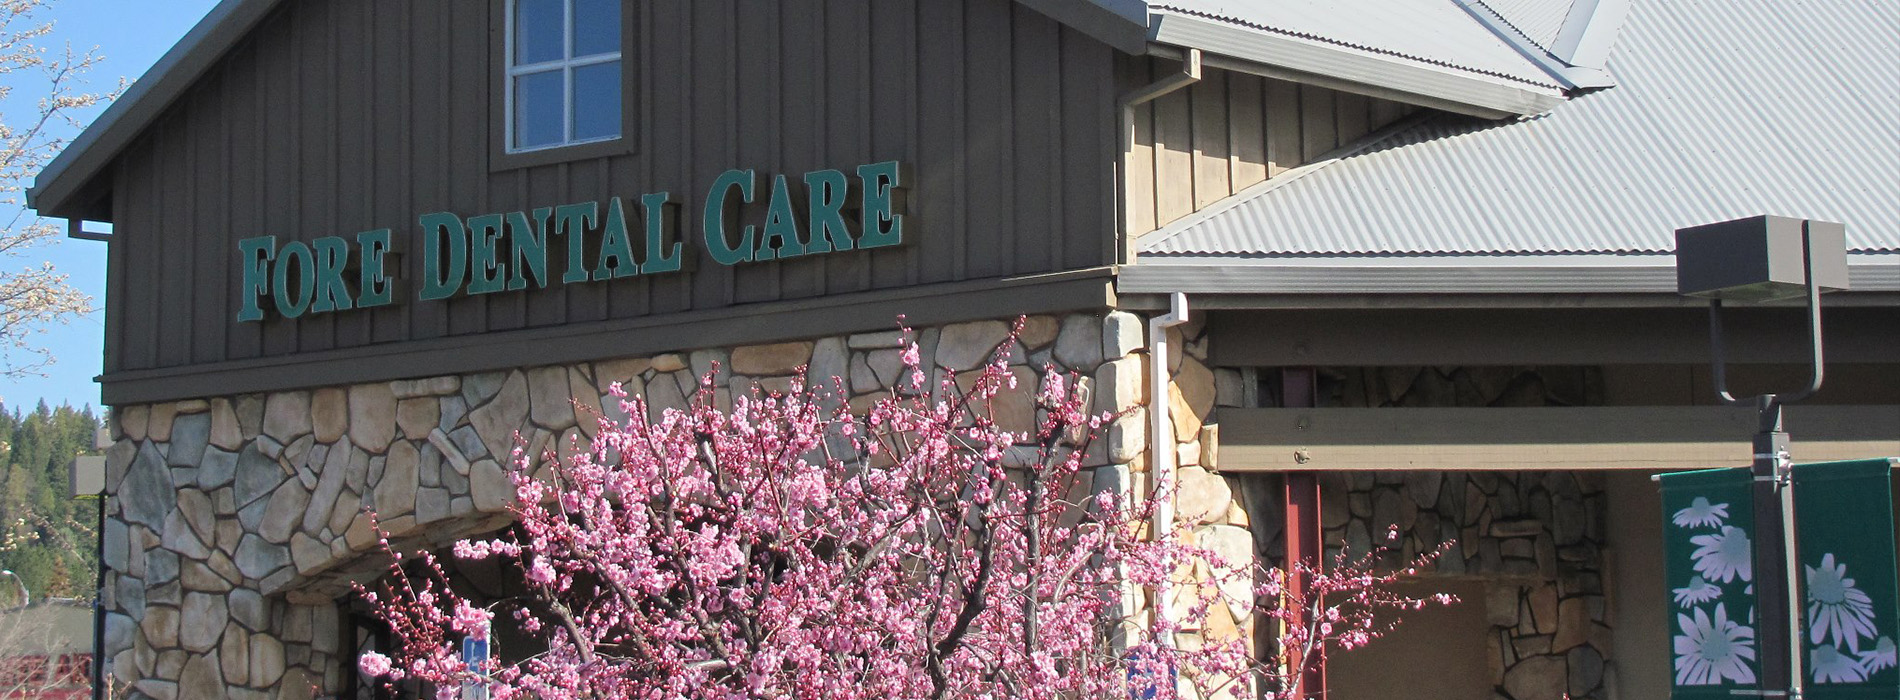 Grass Valley Cosmetic Dental Office